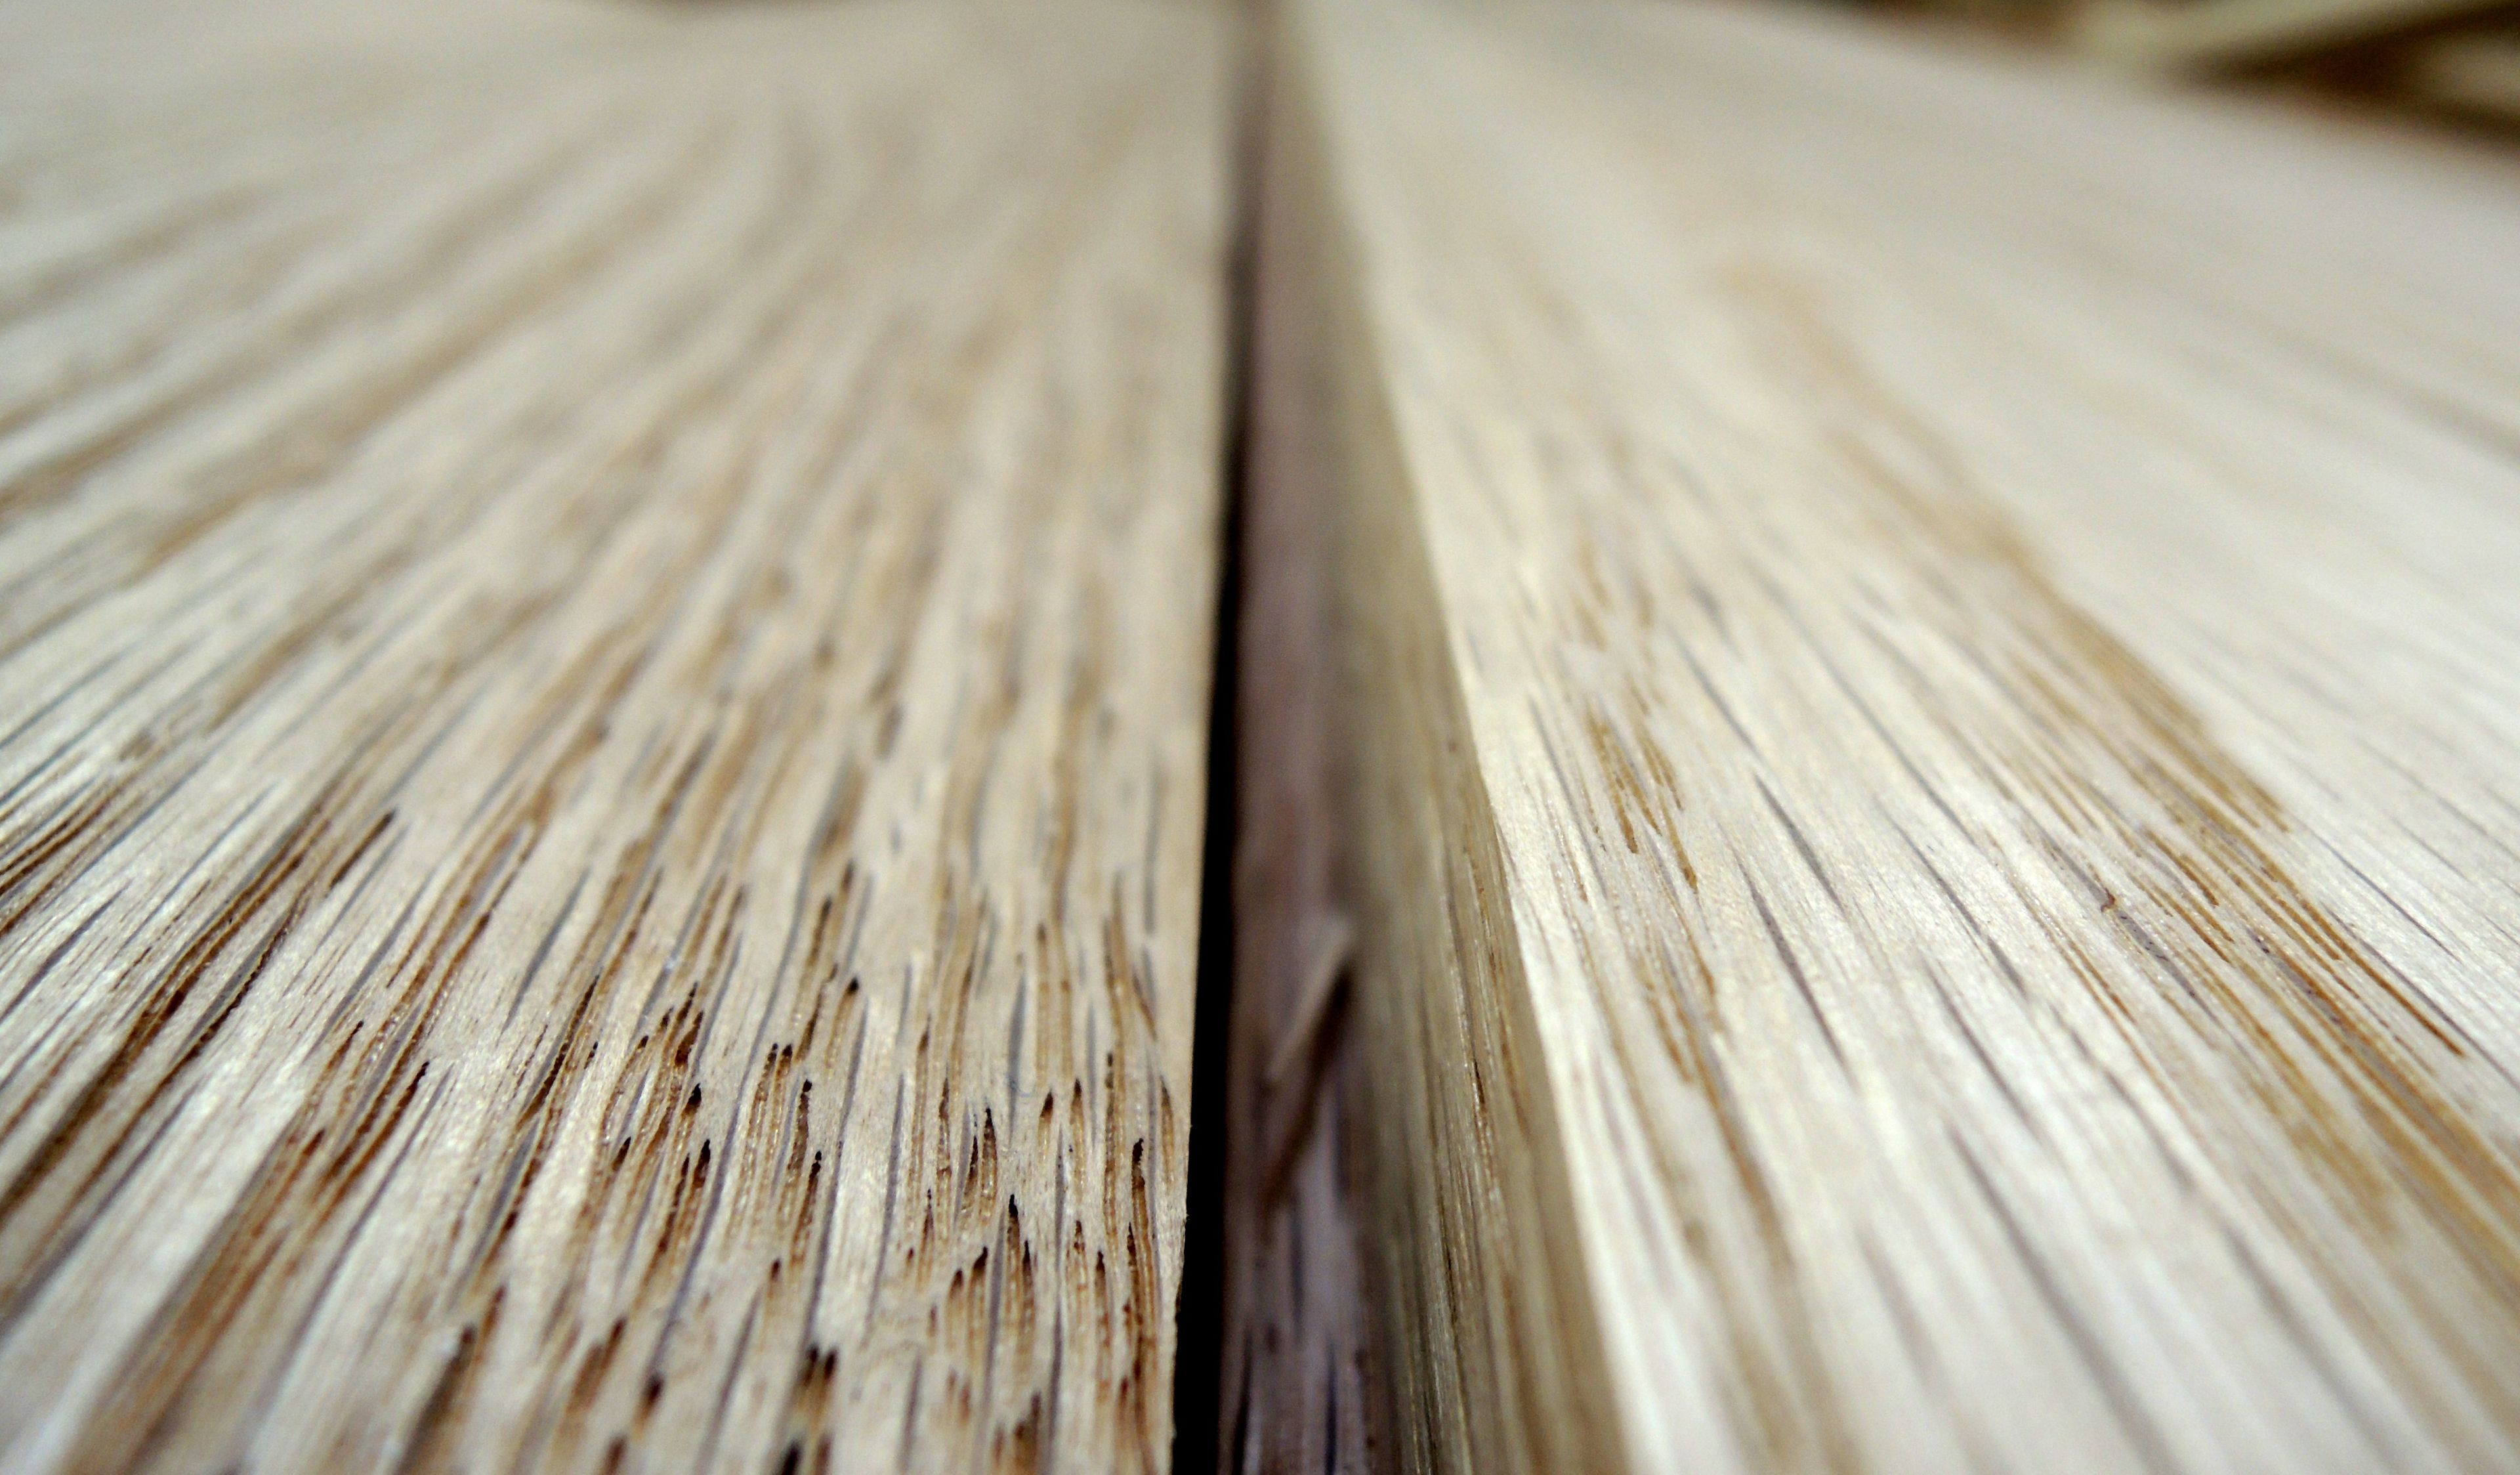 Two wooden boards up close to one another.